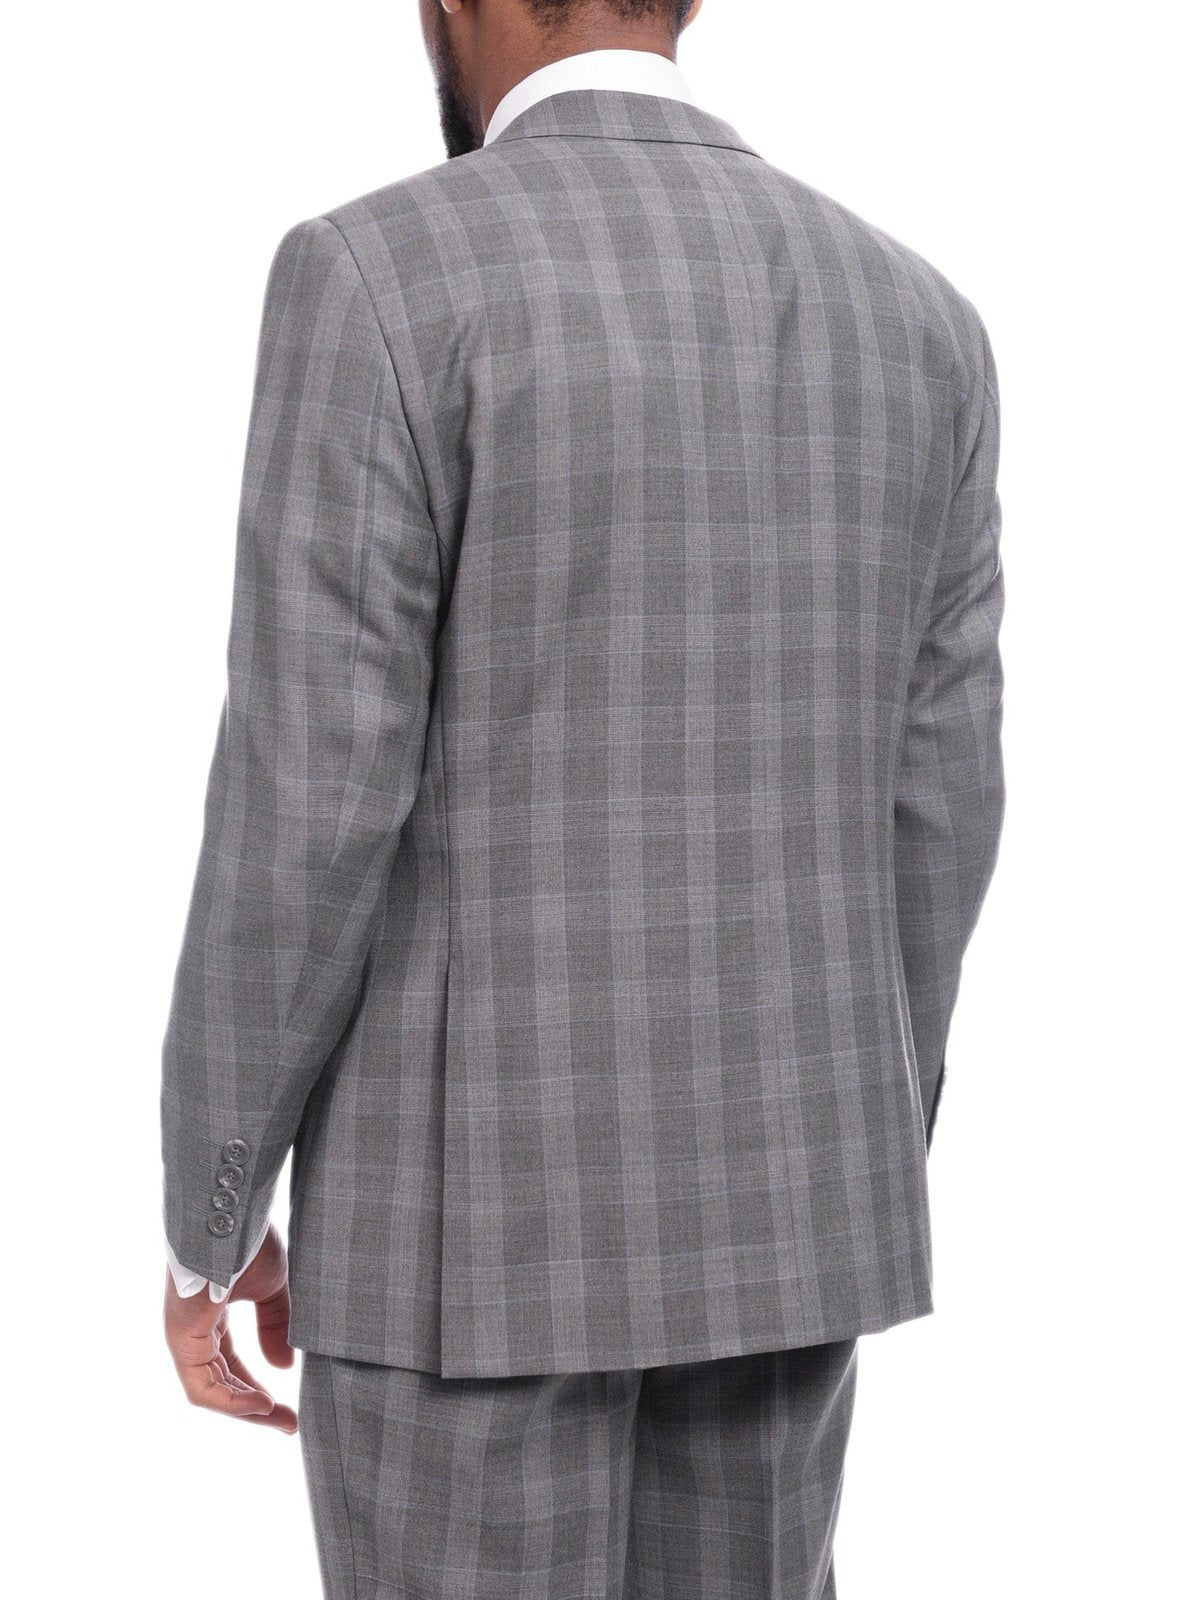 Napoli TWO PIECE SUITS Napoli Classic Fit Gray Glen Plaid Half Canvassed Super 150s Wool Suit